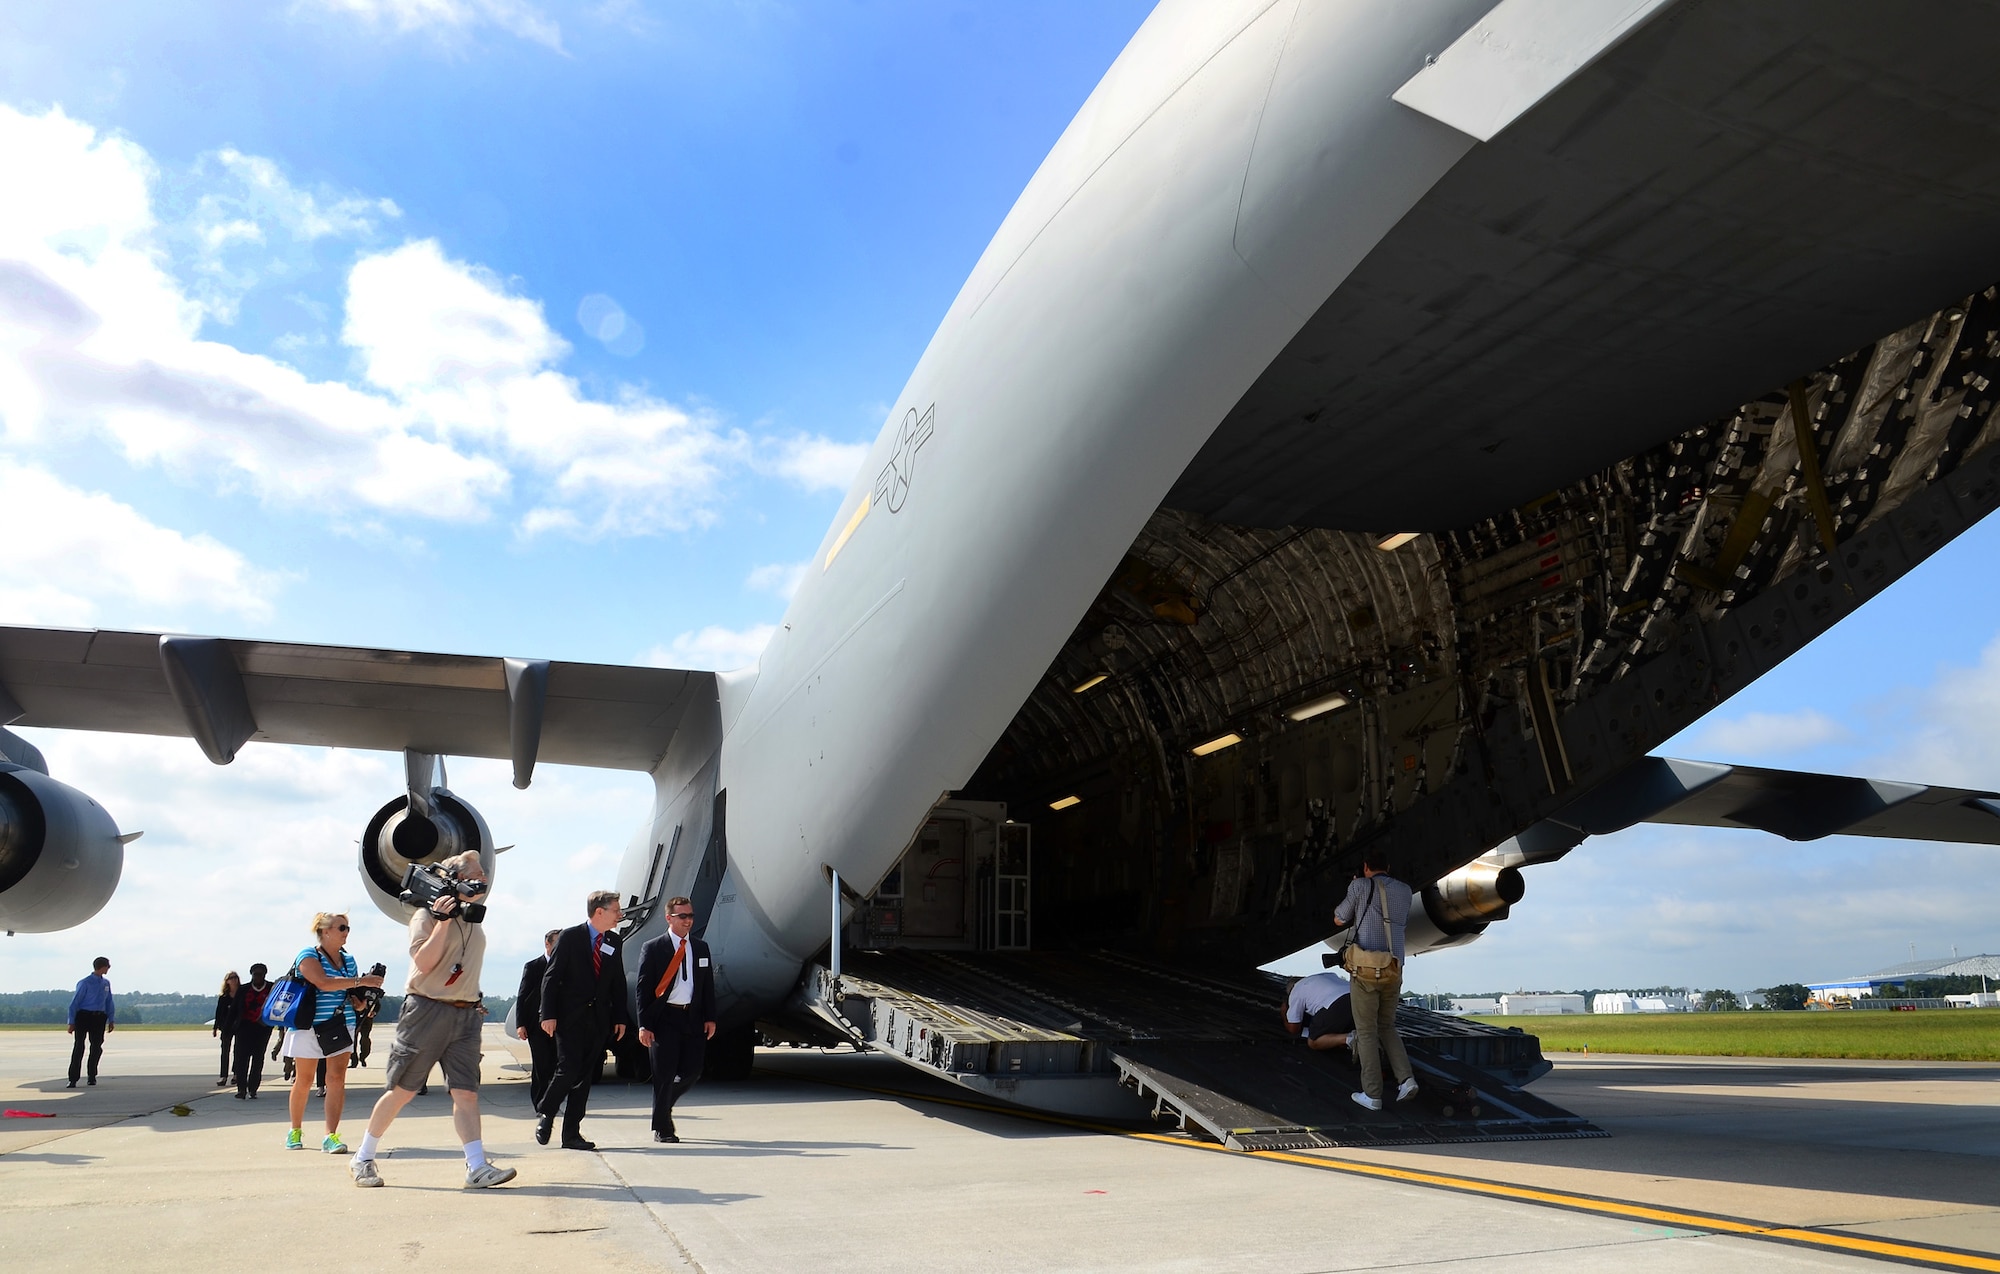 Invited guest and members of the press board a U.S. Air Force C-17  to see the second Containerized Biocontainment Systems unit and how the unit could be airlifted to anywhere in the world if needed; Dobbins Air Reserve Base, Ga., Aug. 11, 2015. The two Containerized Biocontainment units built by MRIGlobal through a partnership with the U.S. State Dept. and the Paul G. Allen Ebola Program, will be positioned at Dobbins ARB, ready for future. (U.S. Air Force photo/ Brad Fallin)